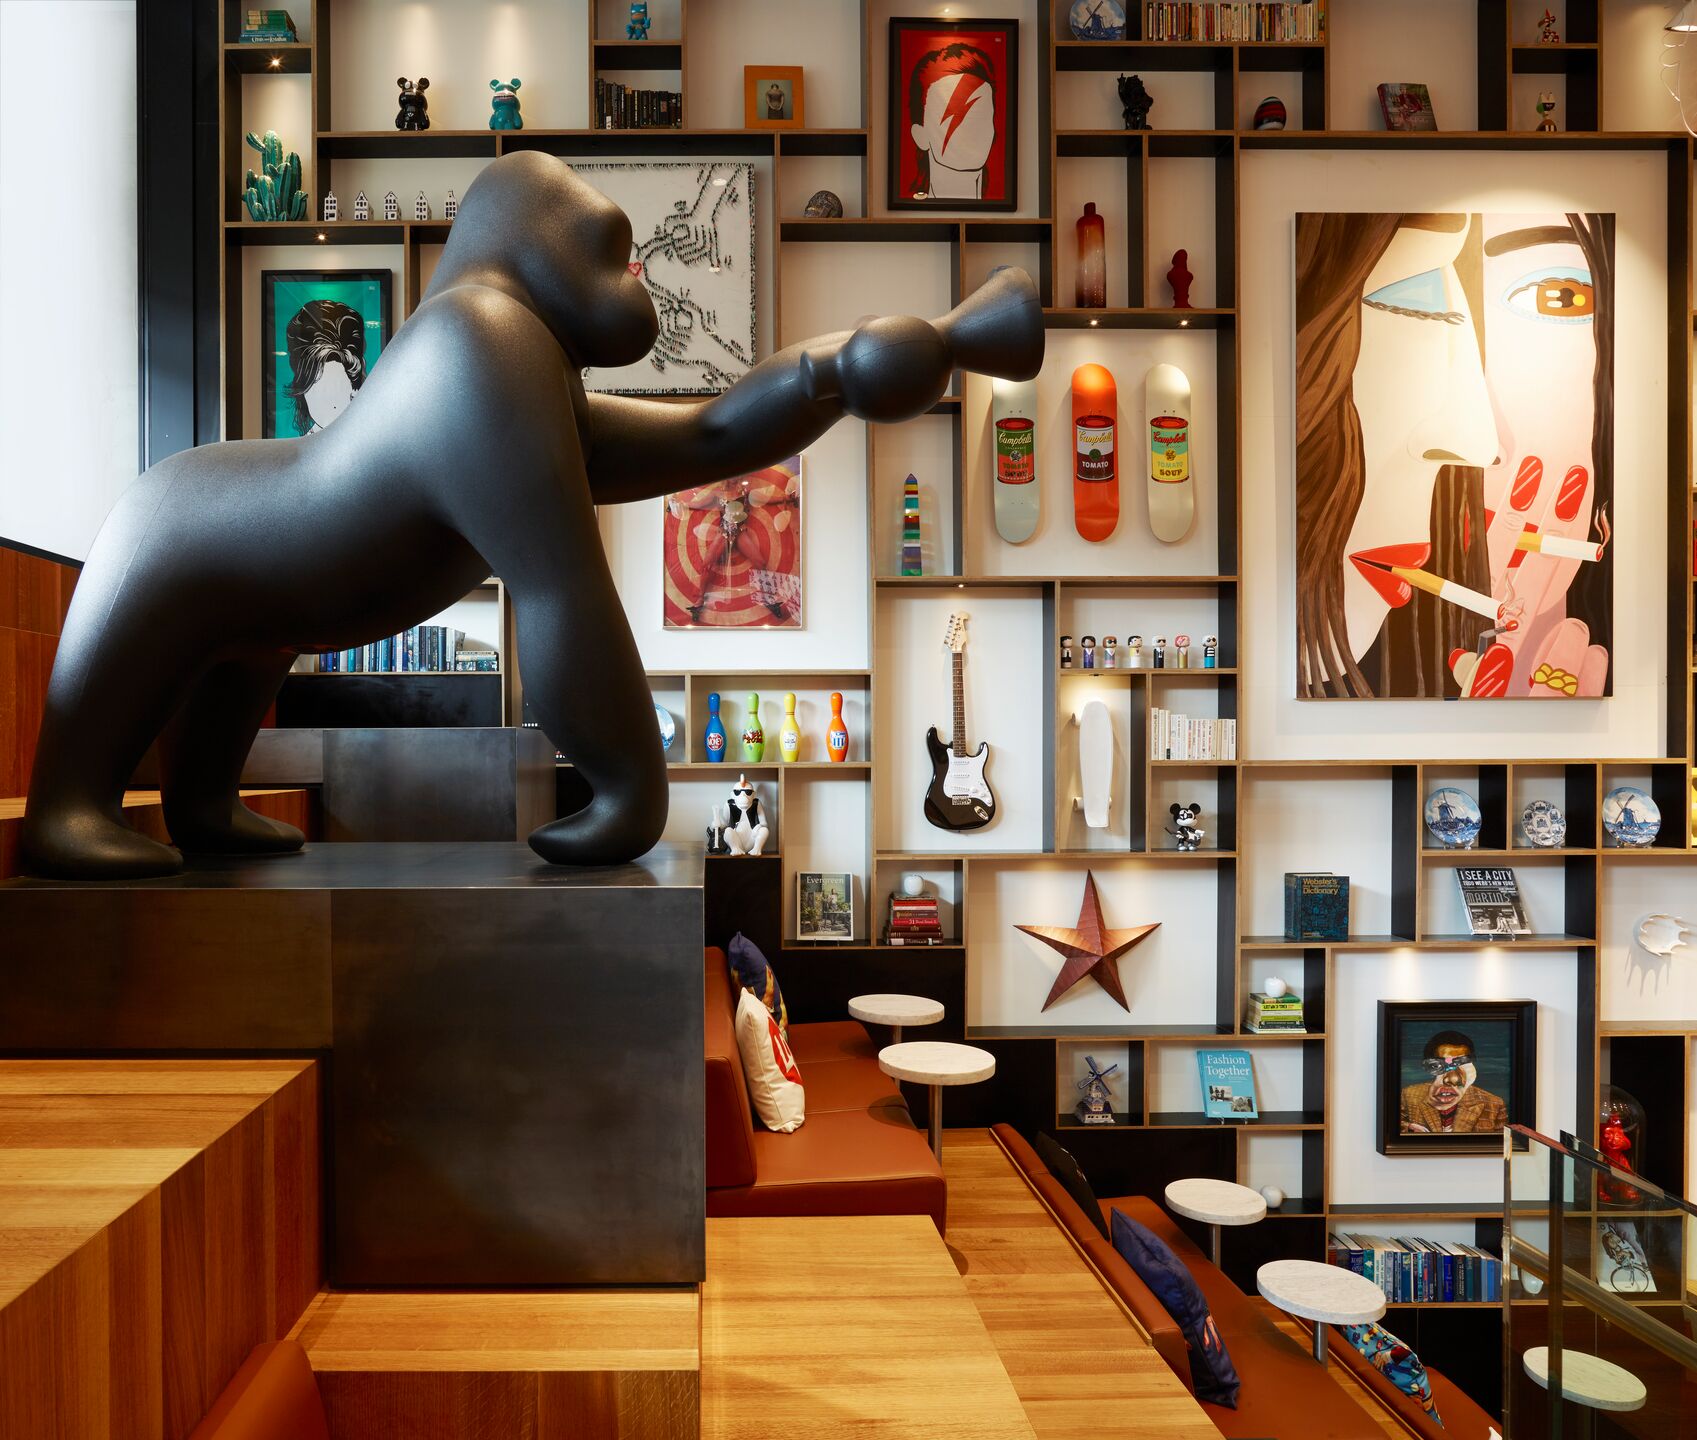 Goodie Nation Partners with citizenM for Events and Discounted Accommodations/Rooms